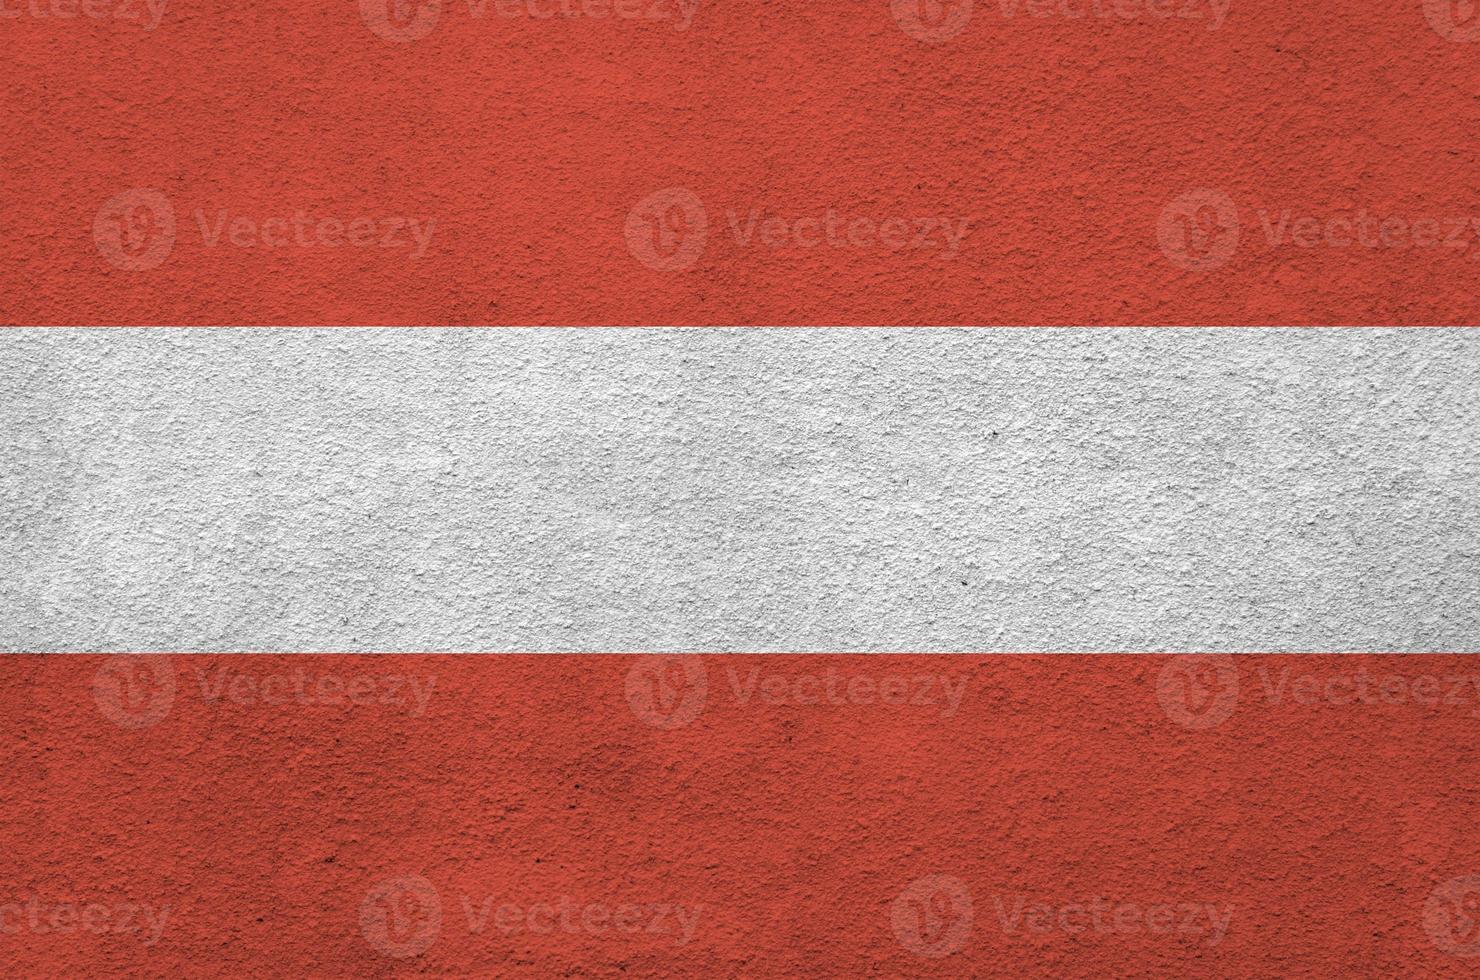 Austria flag depicted in bright paint colors on old relief plastering wall. Textured banner on rough background photo